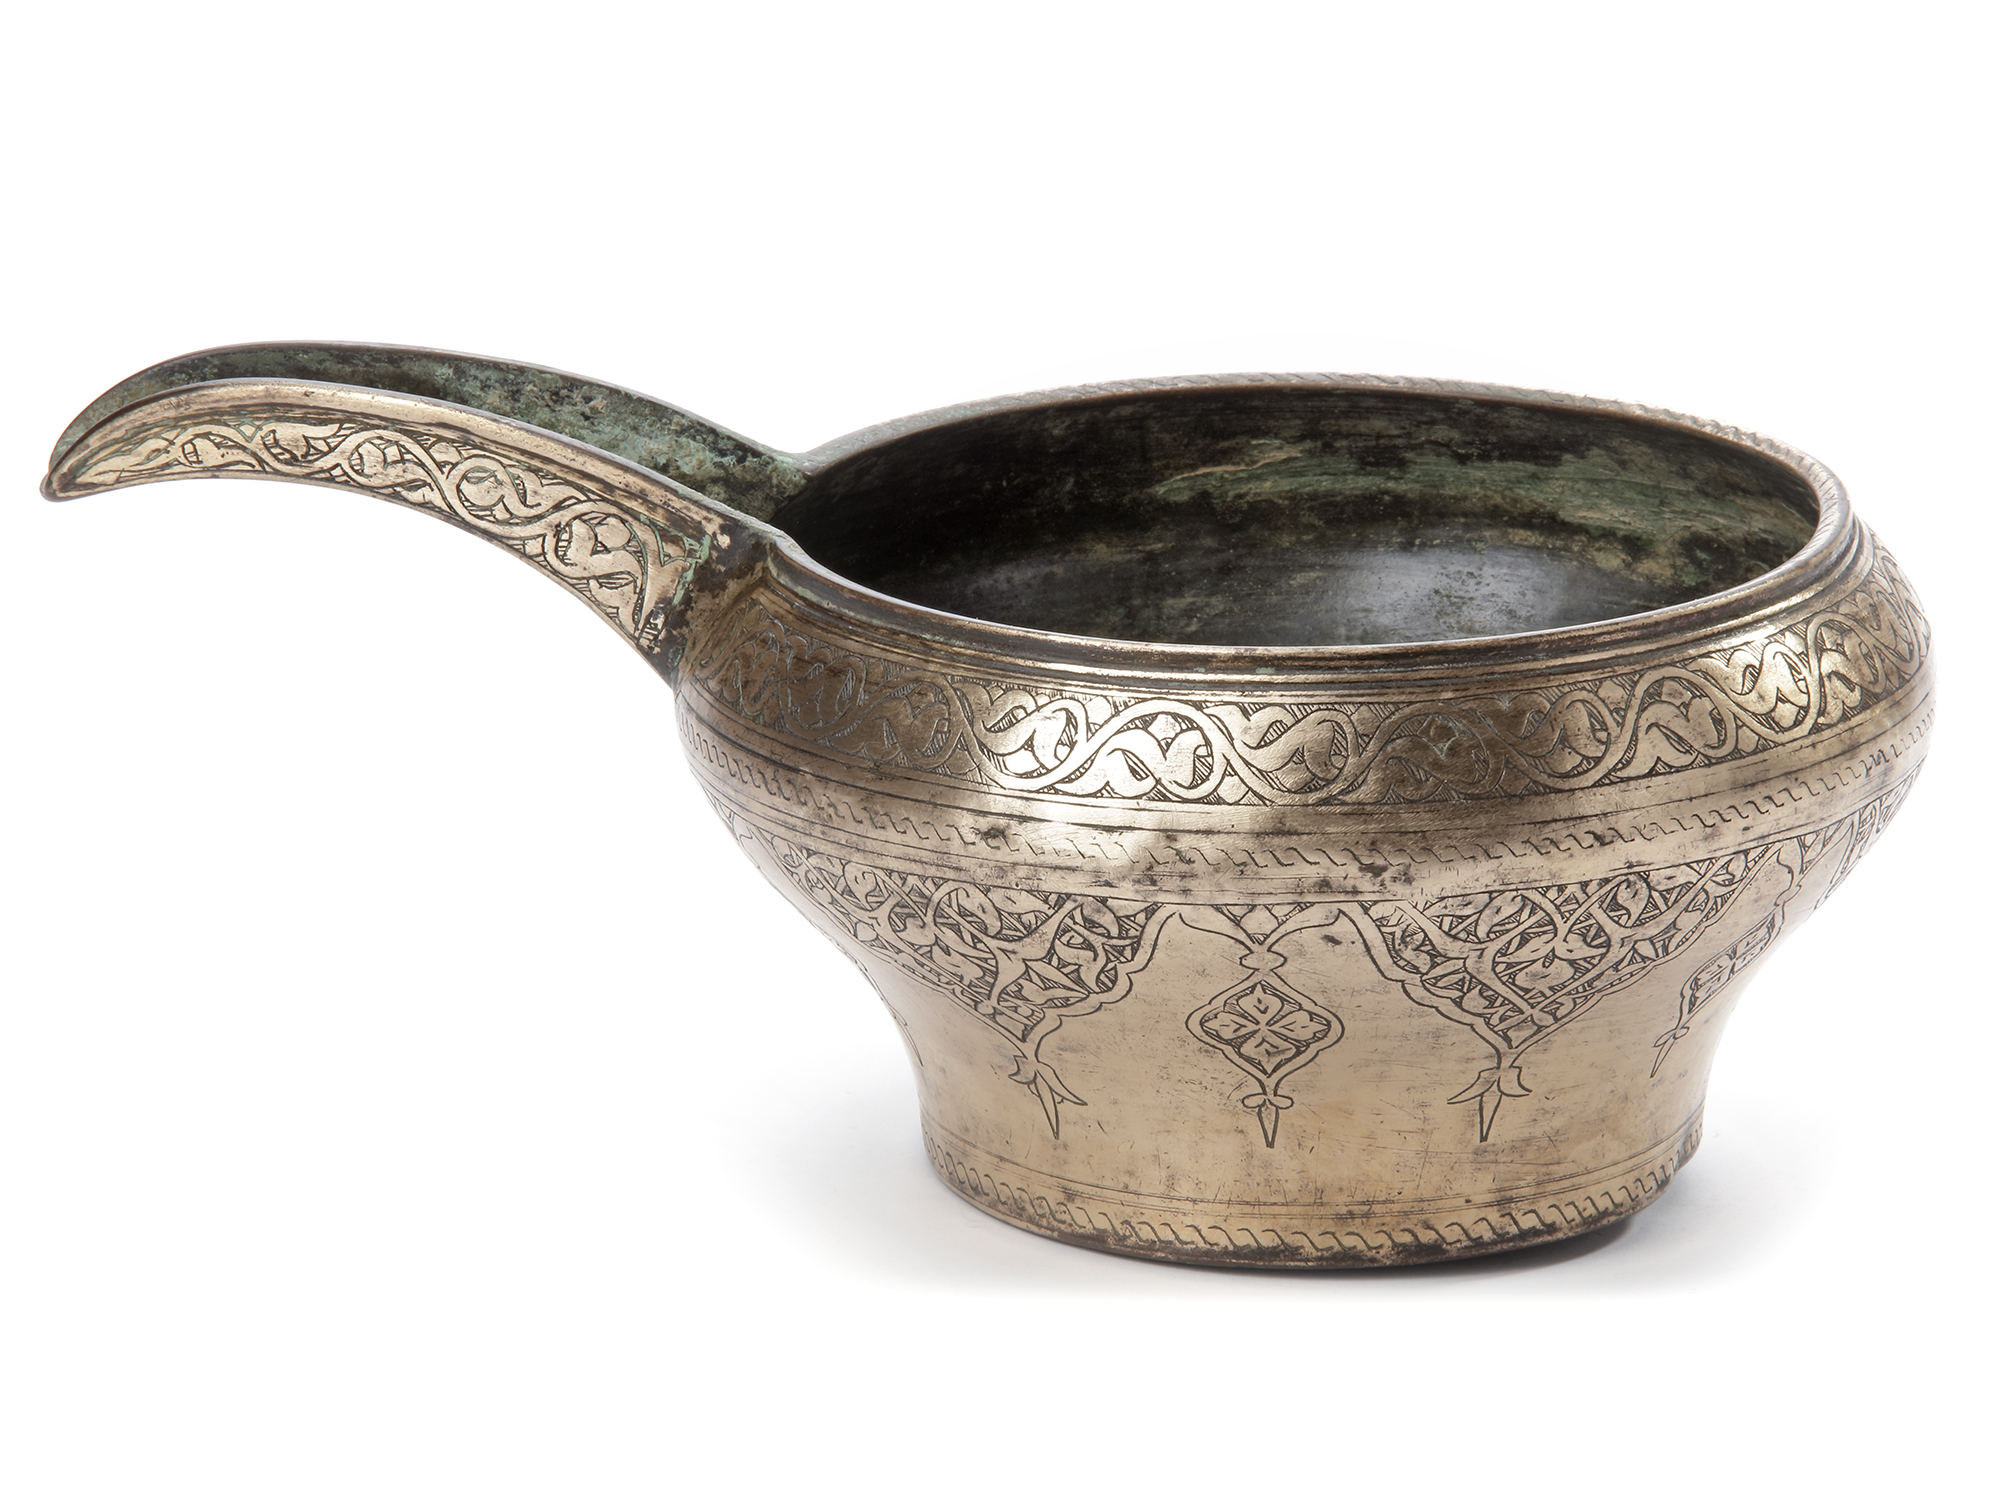 AN ENGRAVED SAFAVID TINNED COPPER SPOUTED POURING BOWL, PERSIA, 17TH CENTURY - Image 2 of 4